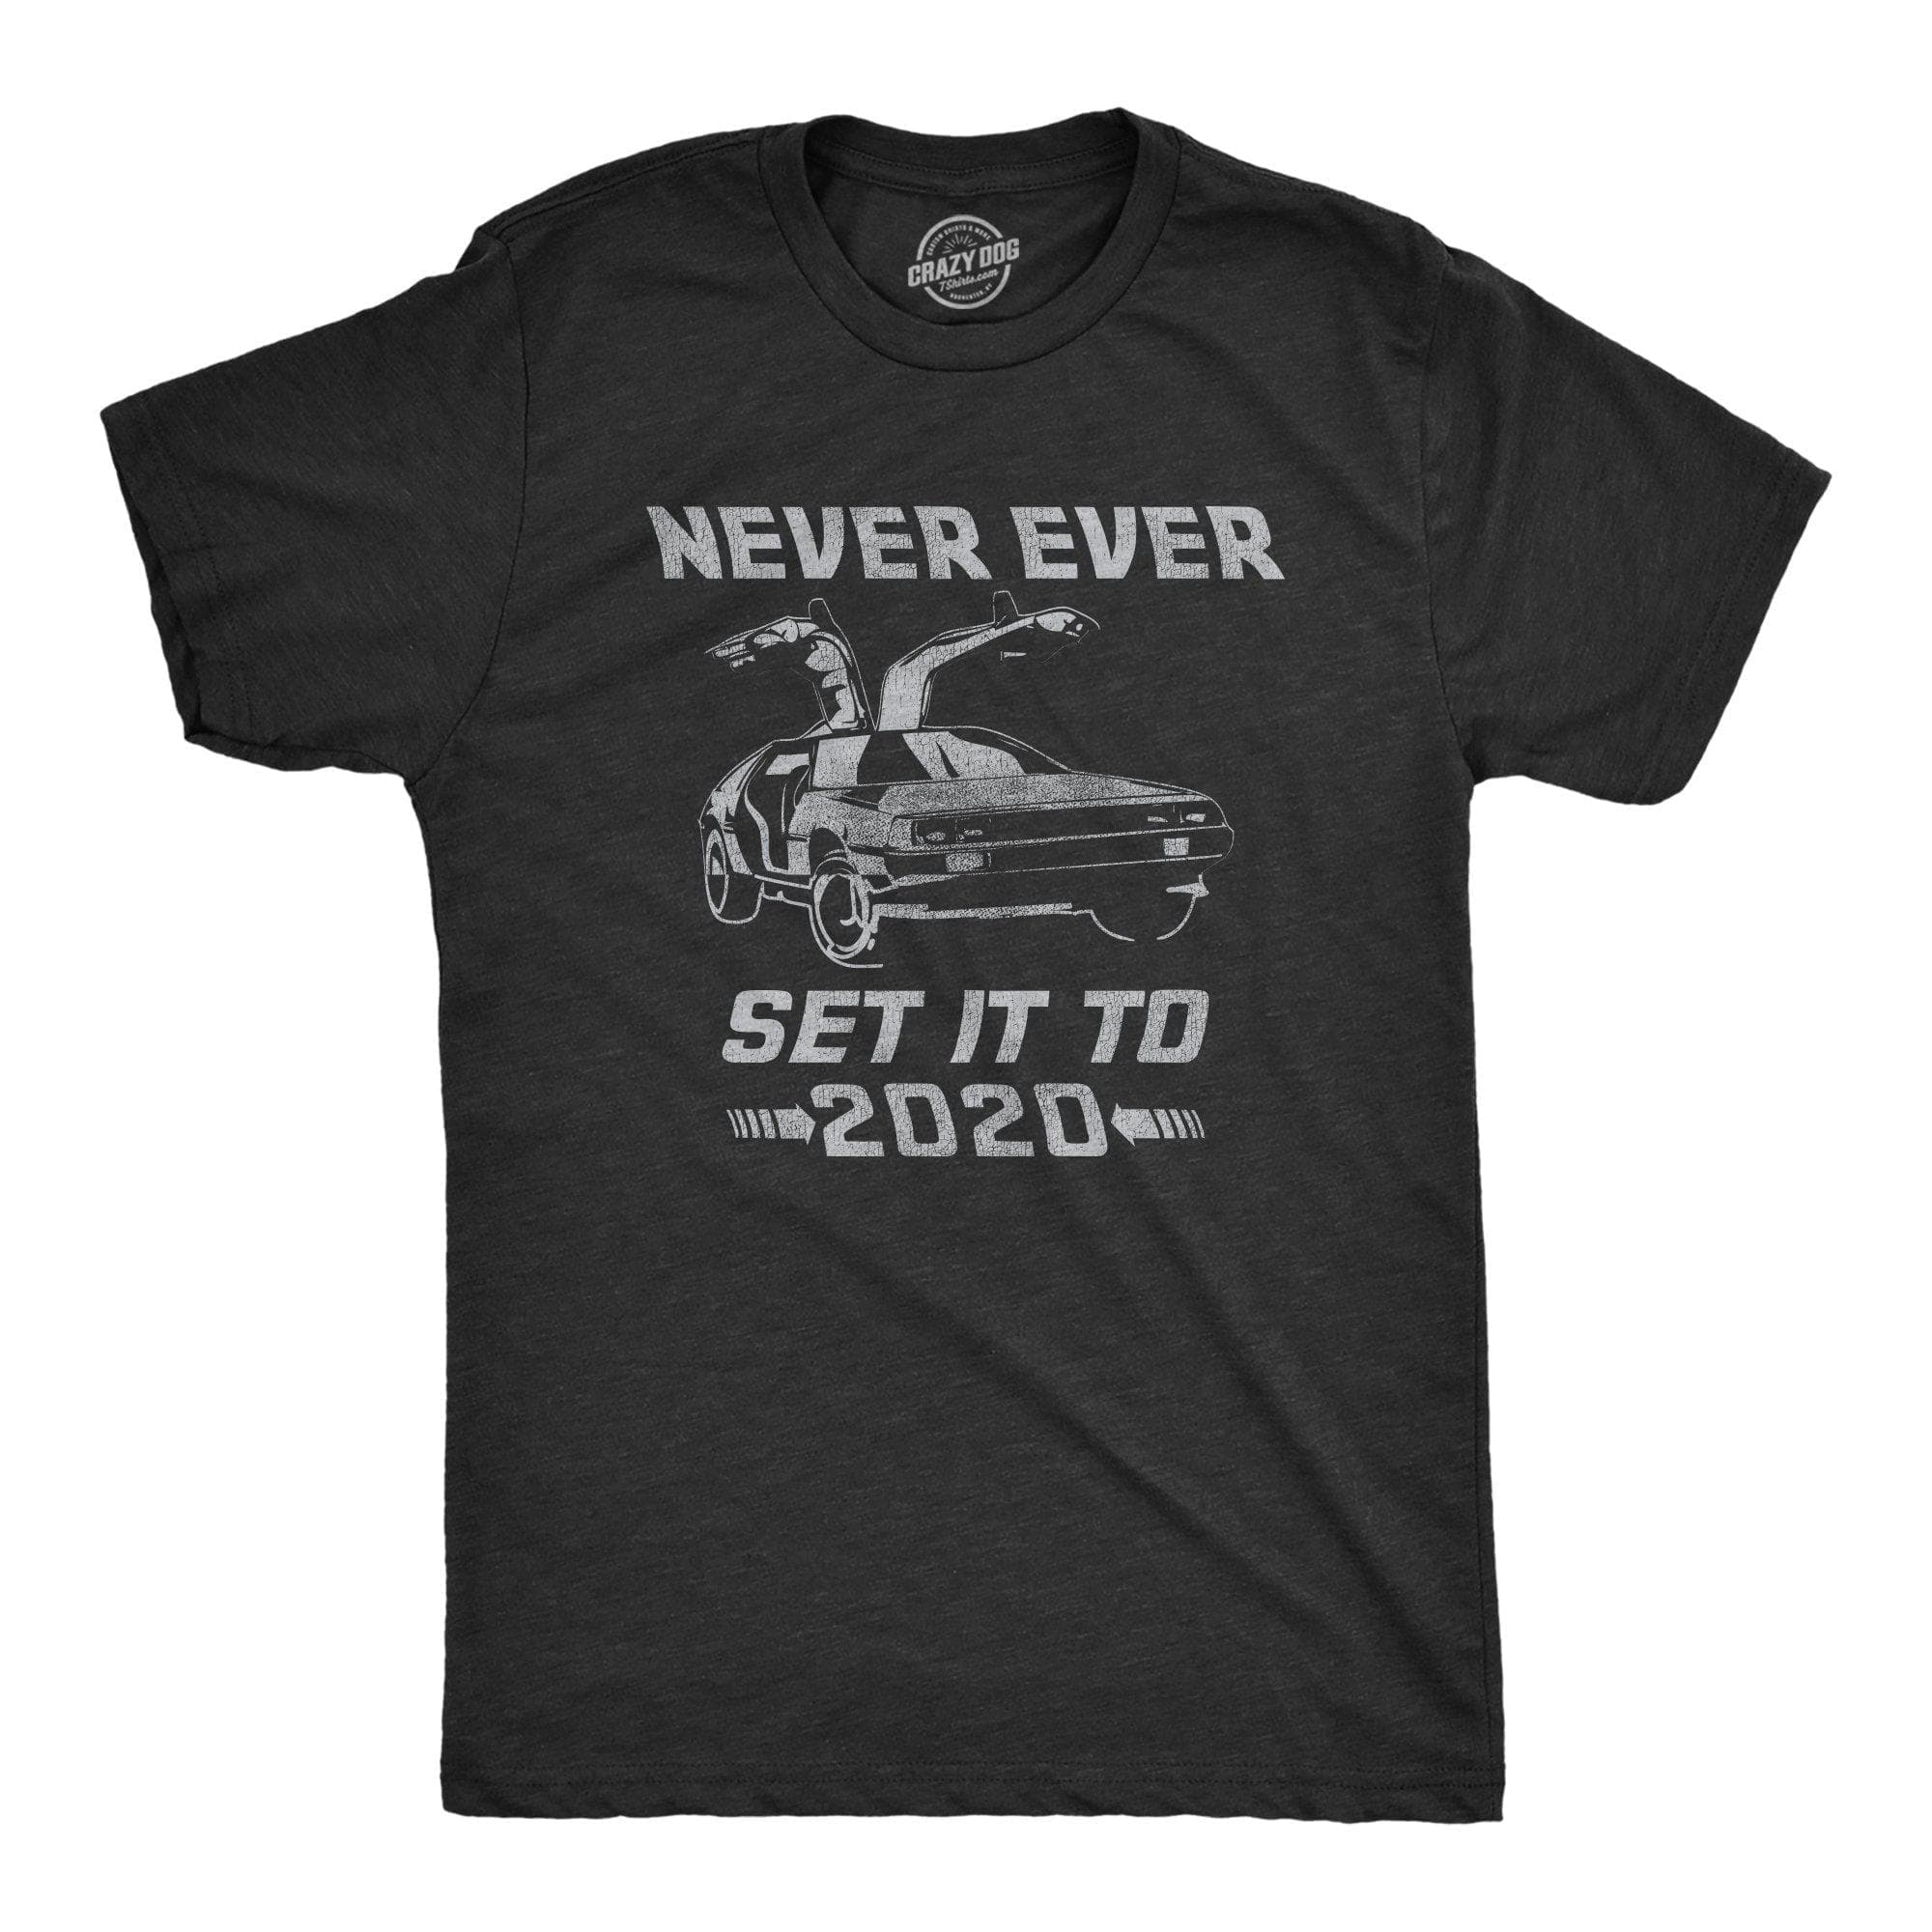 Never Ever Set It To 2020 Men's Tshirt - Crazy Dog T-Shirts